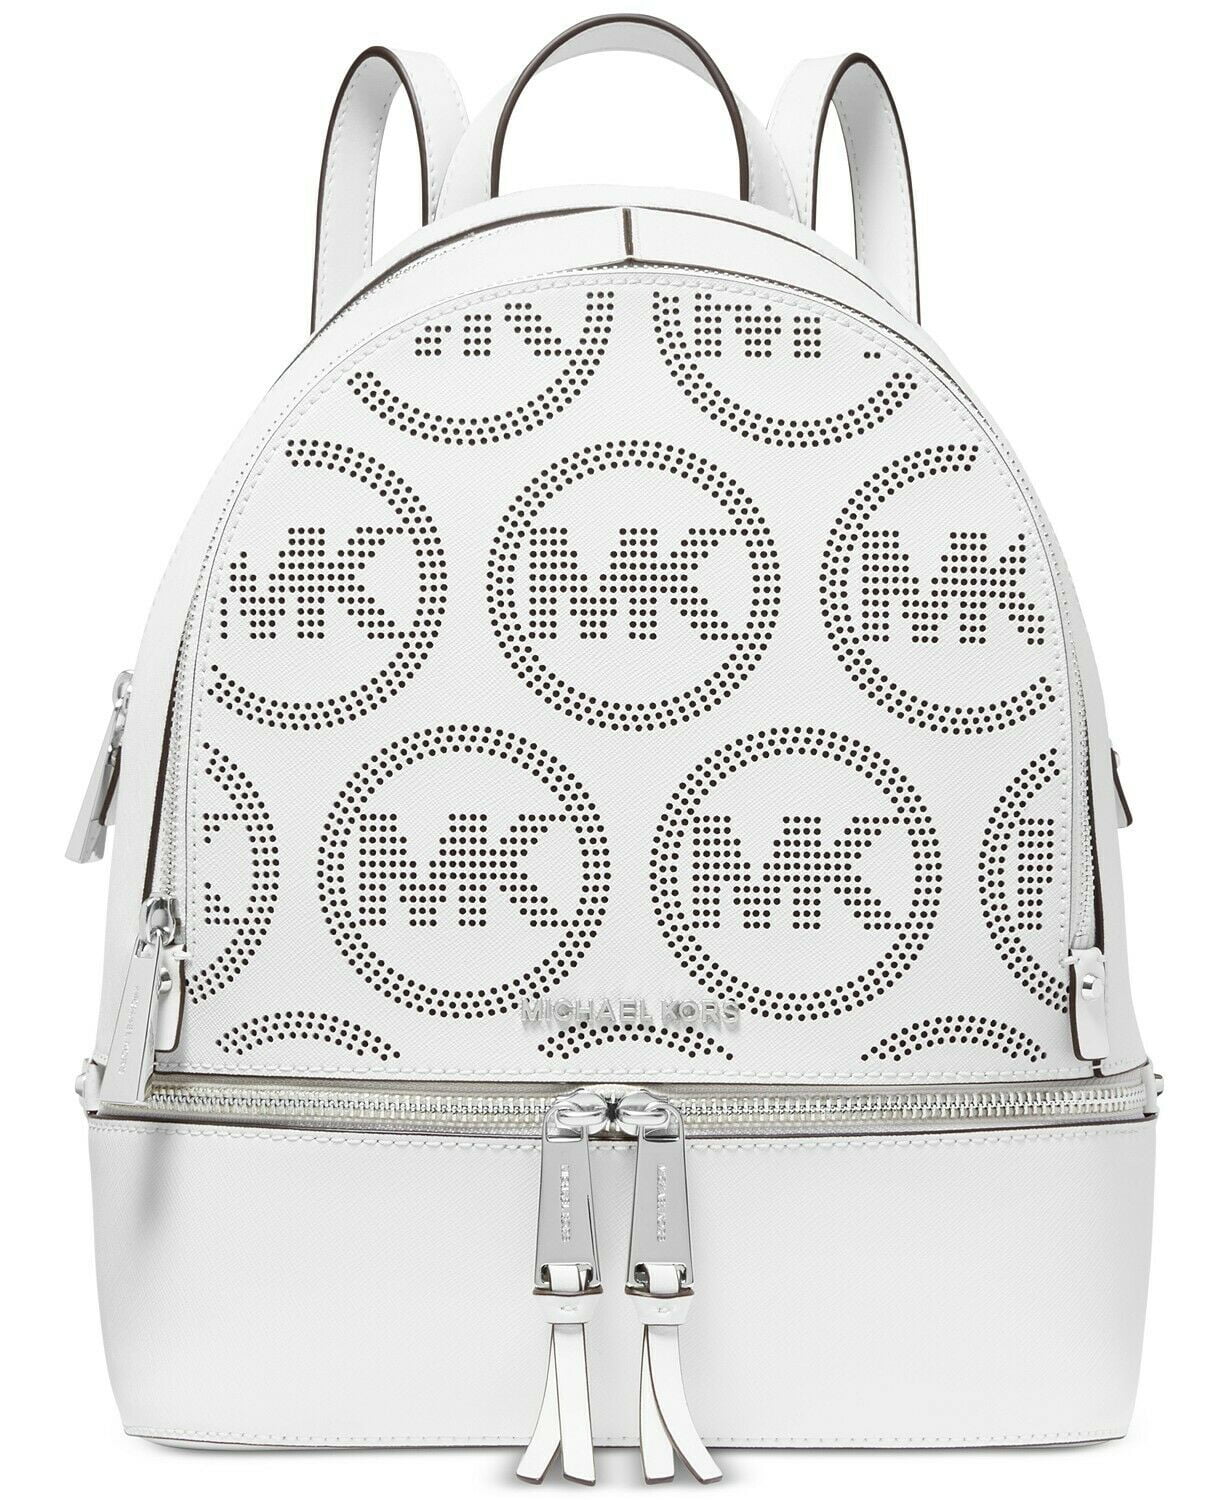 Michael Kors Outlet: Michael Rhea Zip backpack in textured leather - Black